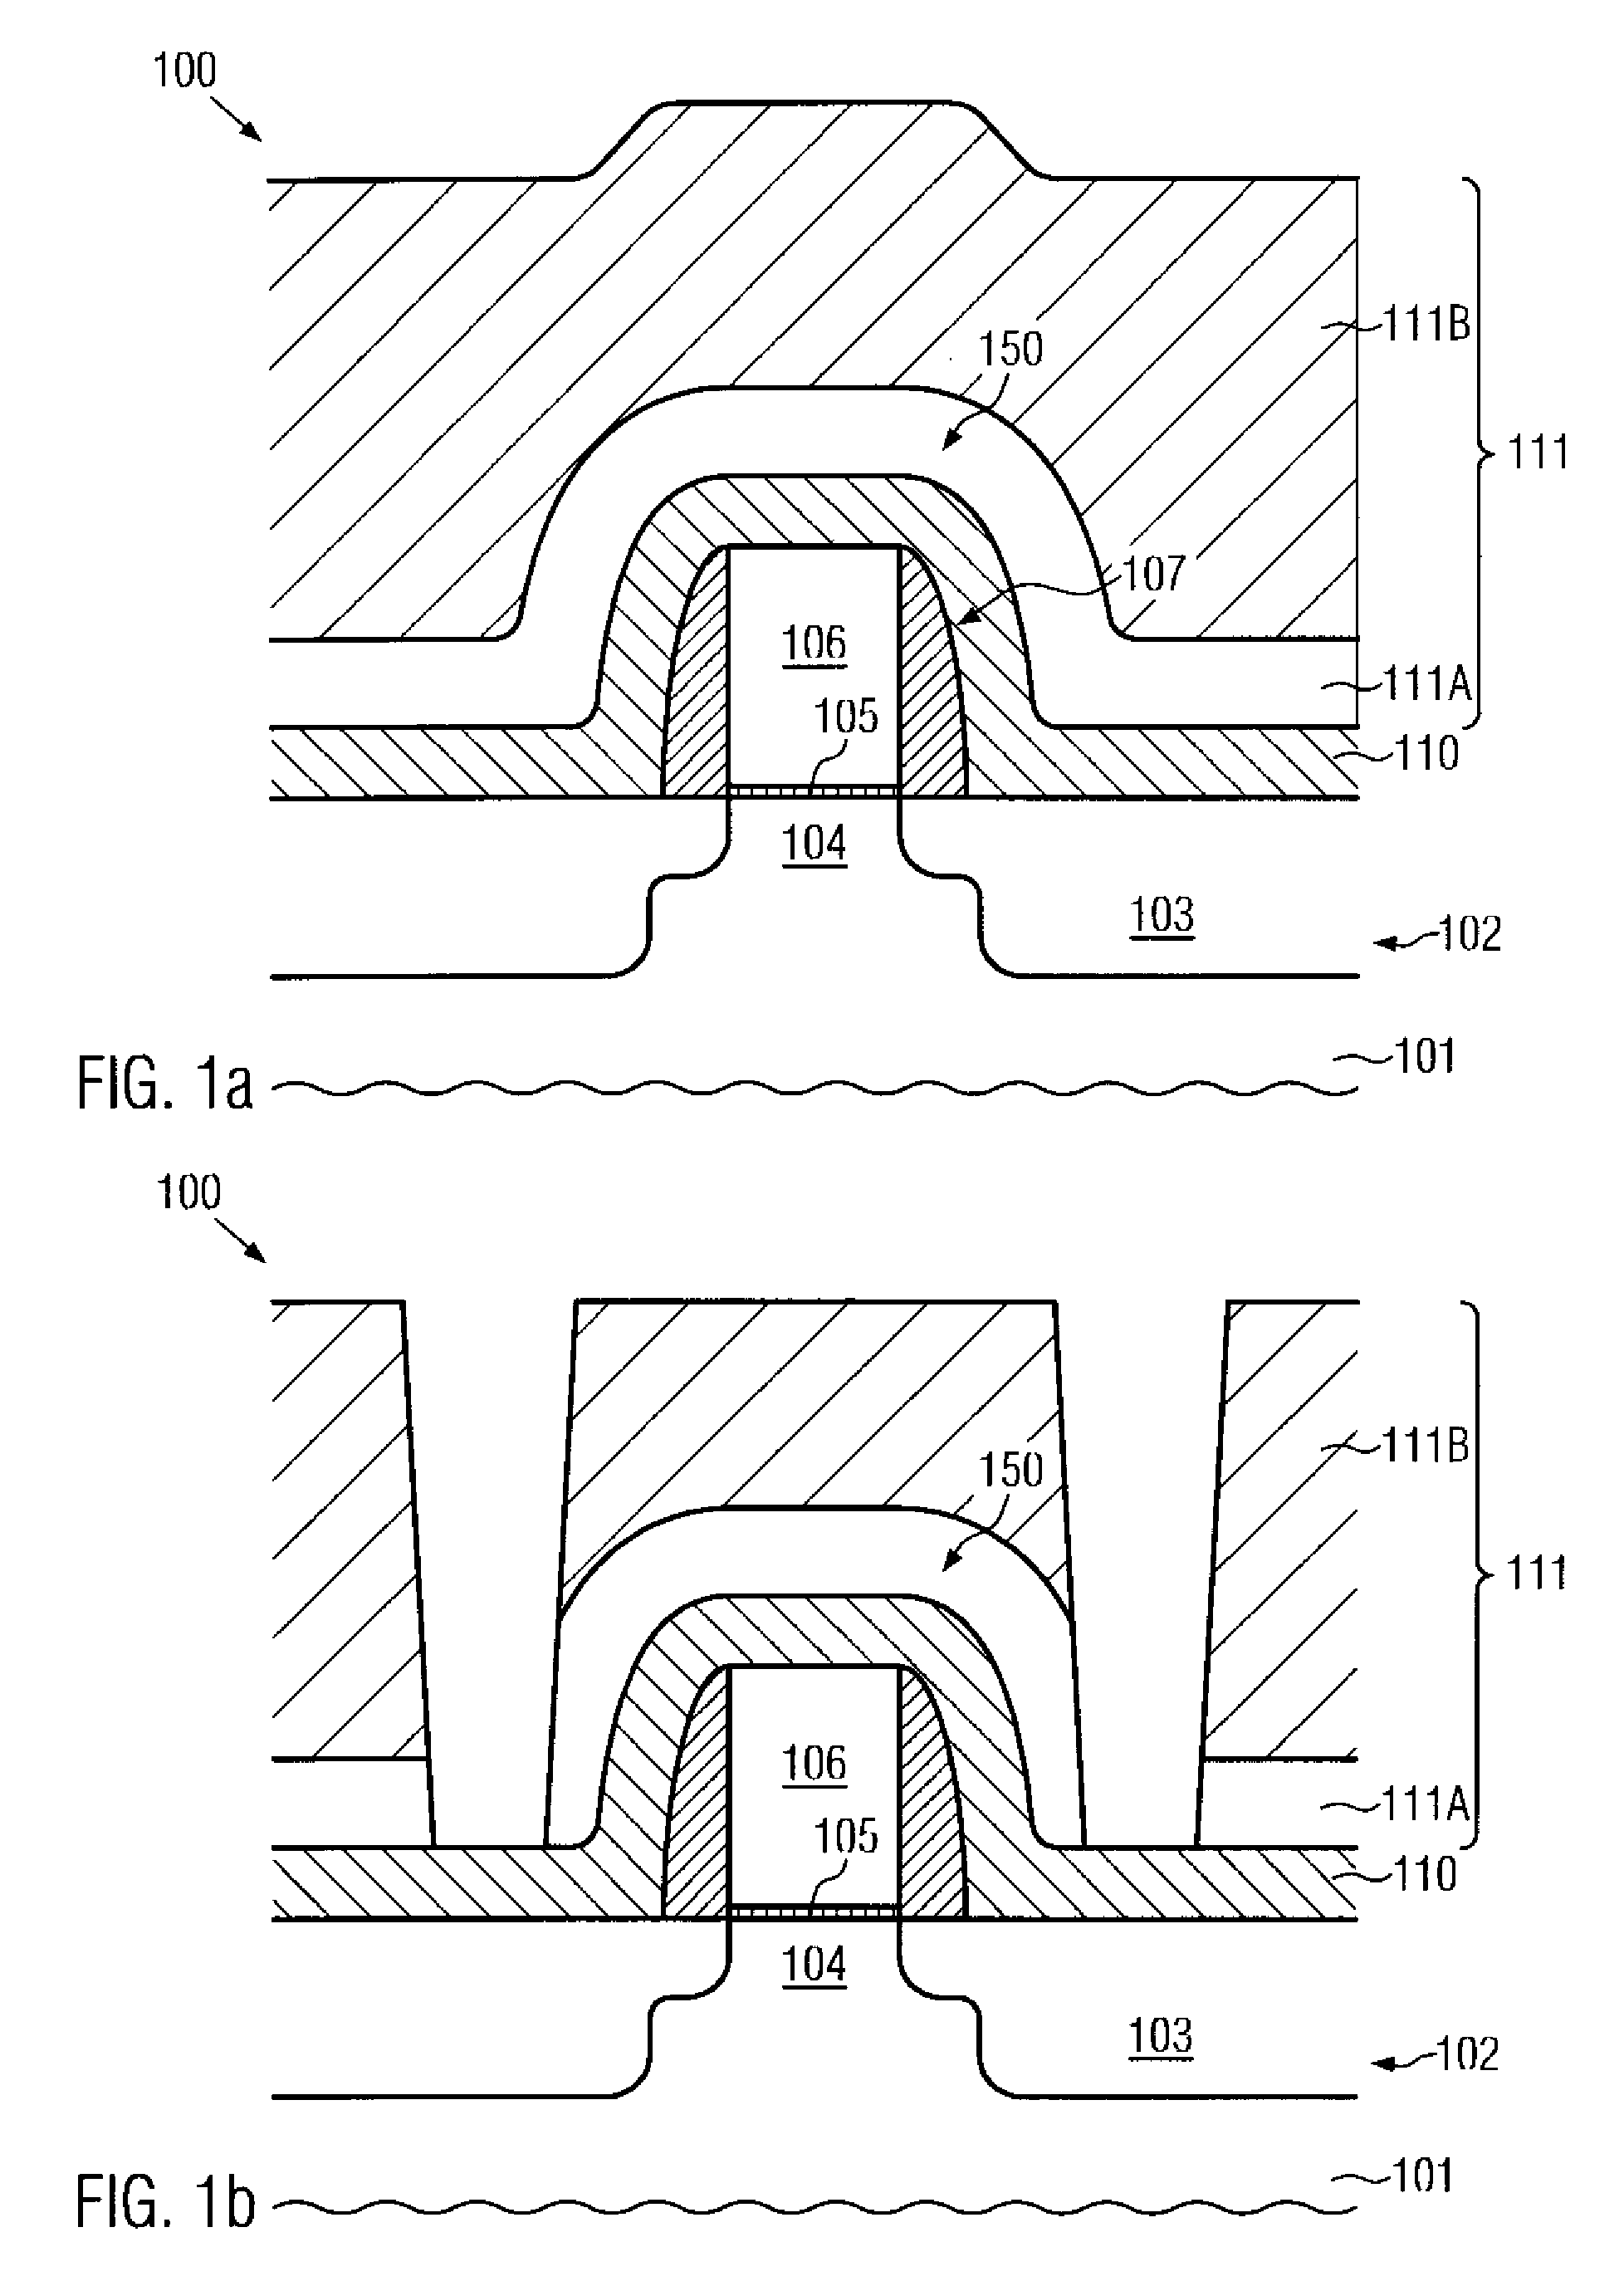 N-channel field effect transistor having a contact etch stop layer in combination with an interlayer dielectric sub-layer having the same type of intrinsic stress